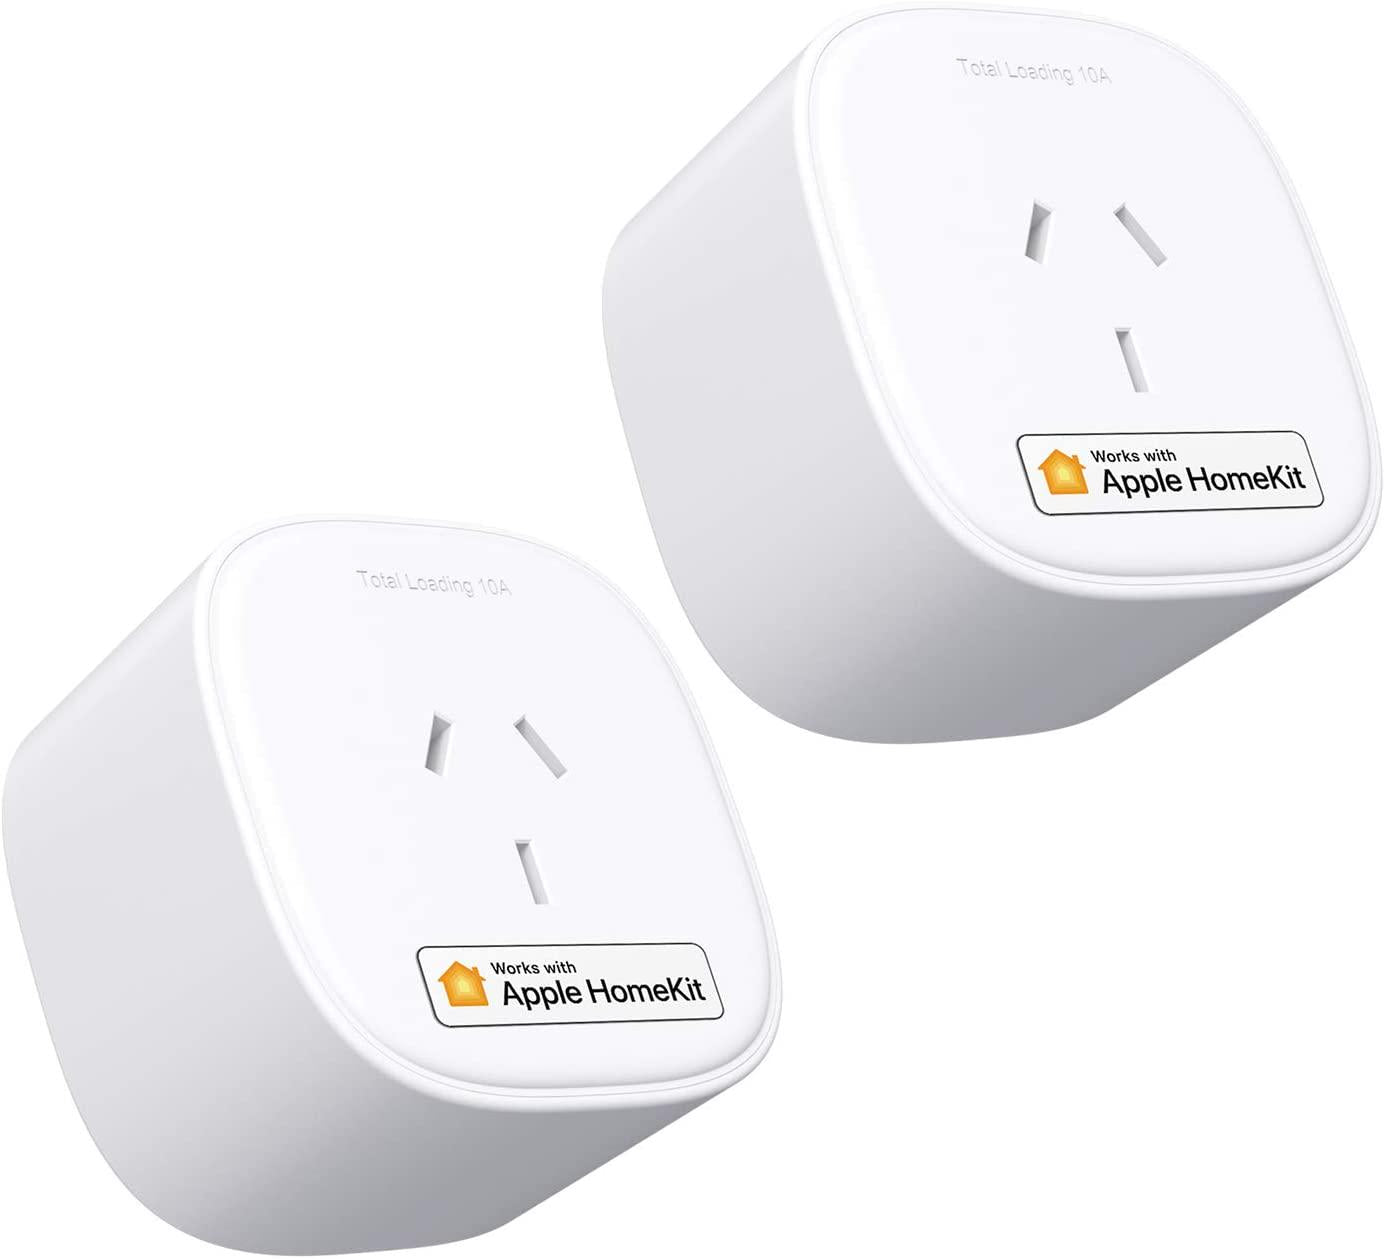 meross, meross Smart Plug WiFi Outlet Works with Apple HomeKit, Siri, Alexa, Google Home, Smart Socket with Timer Function, Remote Control, No Hub Required - 2 Pack